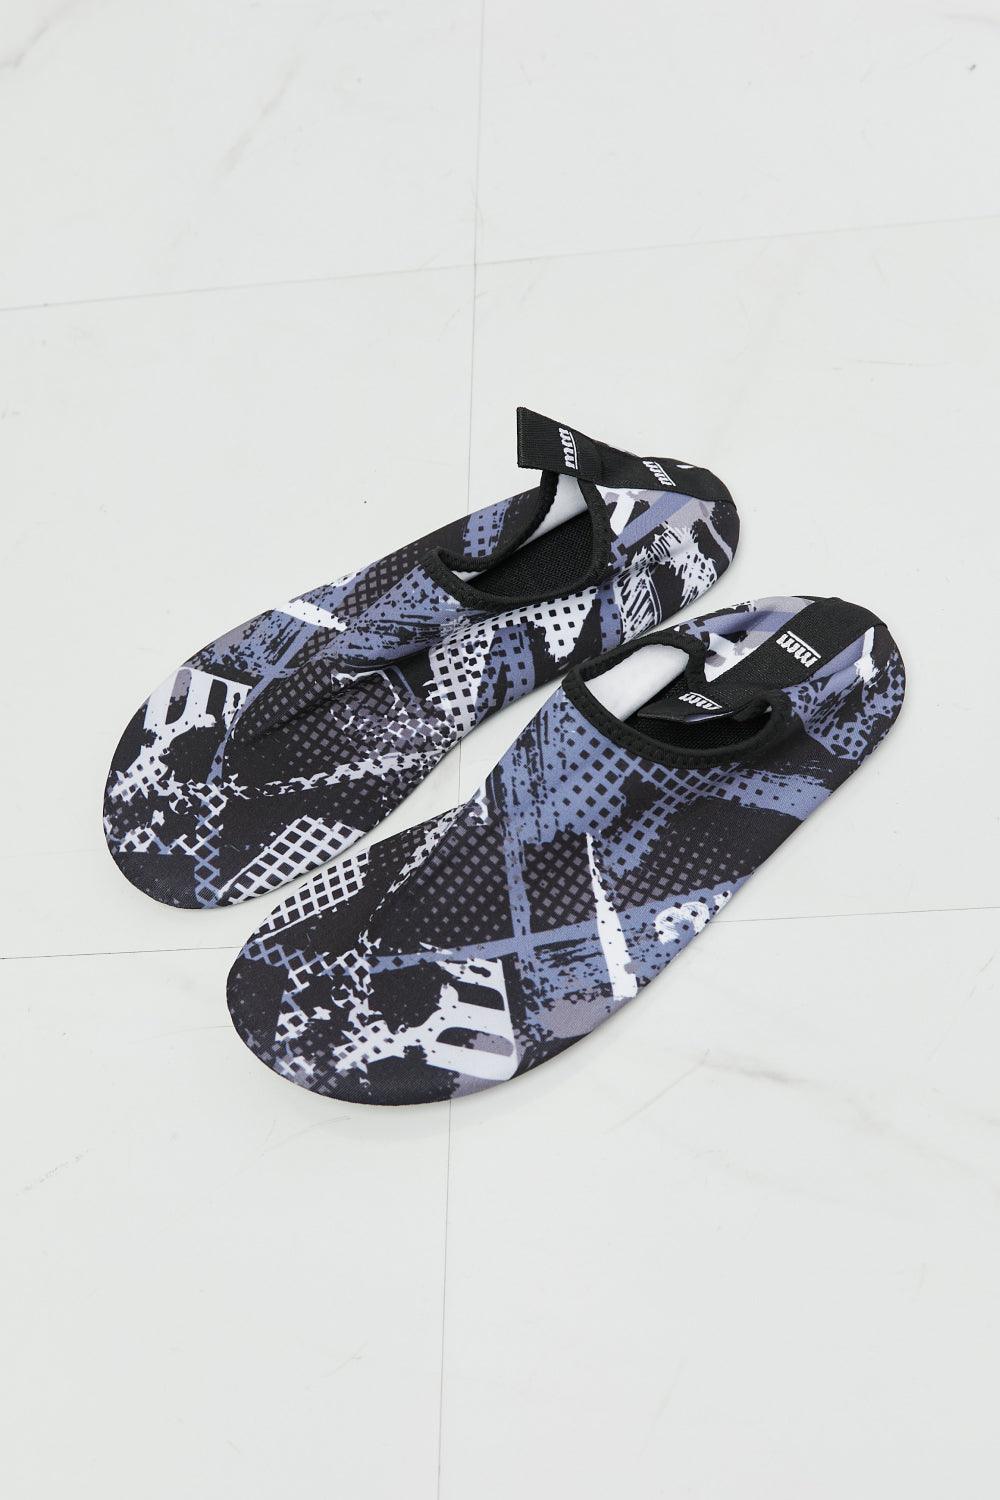 MMshoes On the Shore Water Shoes in Black Pattern - SteelBlue